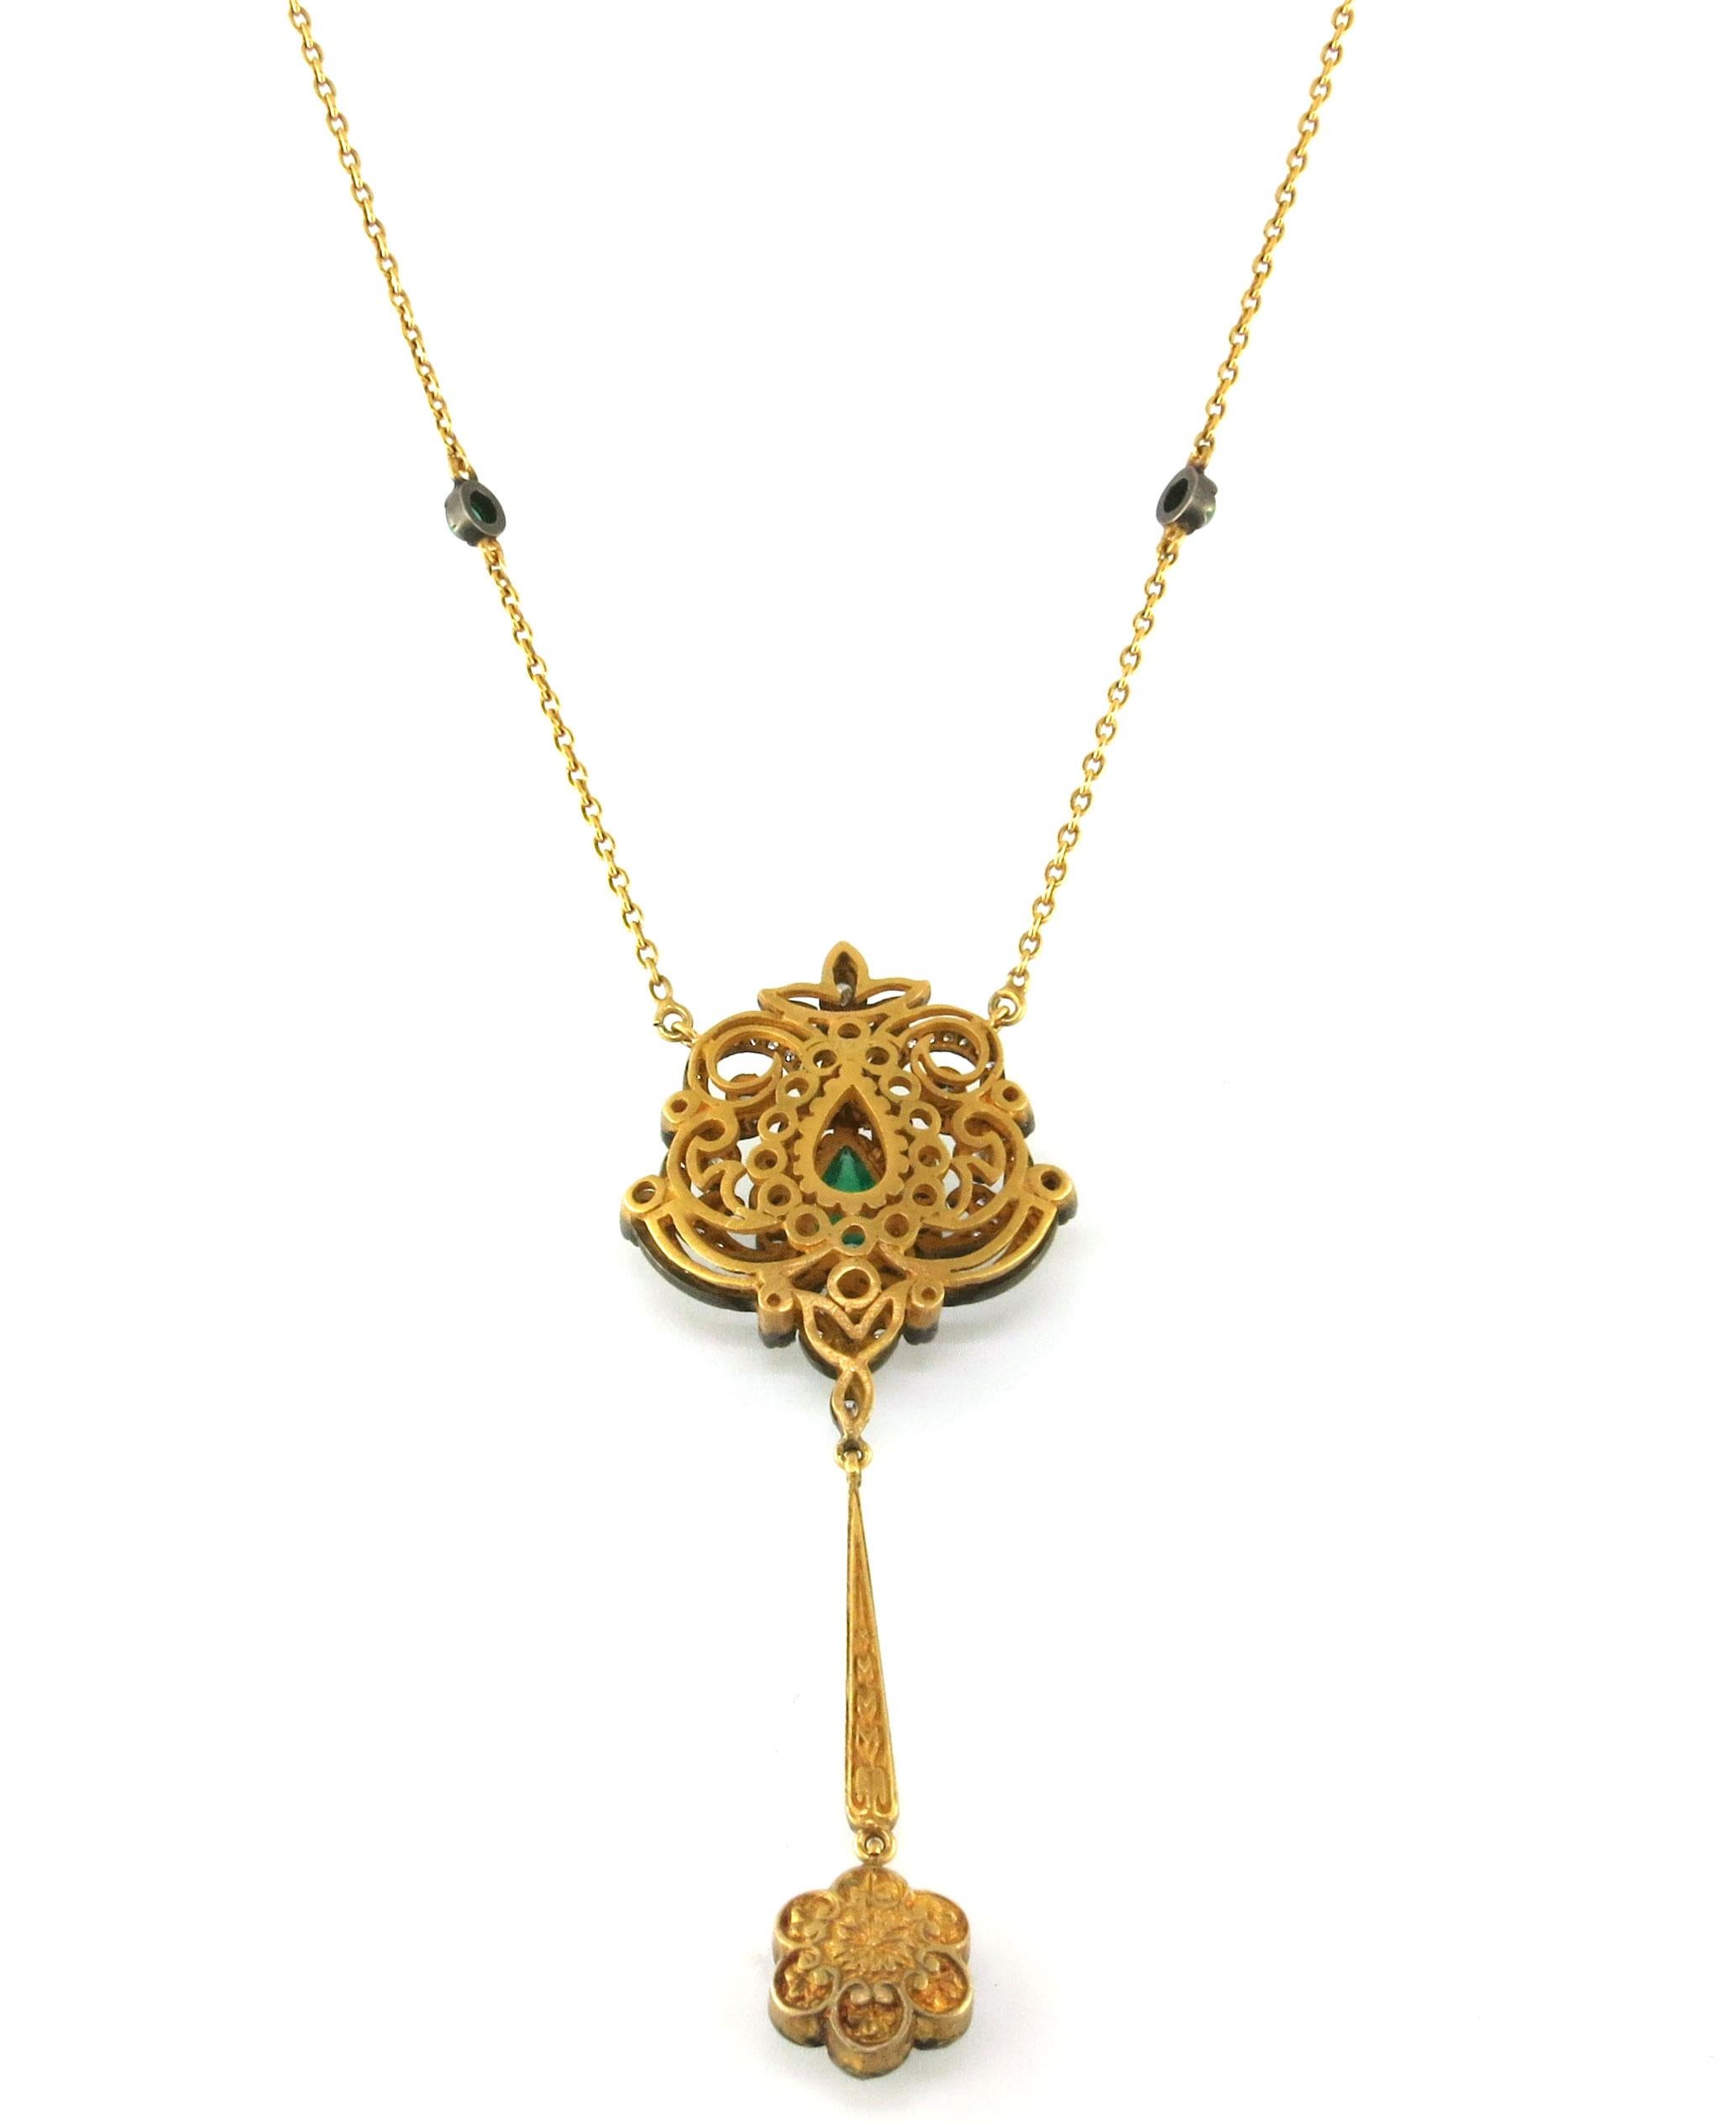 This stunning pendant showcases the beauty of 18 Karat Yellow Gold and a breathtaking 2.01 CT Emerald Cabochon center, surrounded by 2.6 CT Rose Cut Diamonds. With a rustic, antique finish and intricate detailing, this piece is a perfect